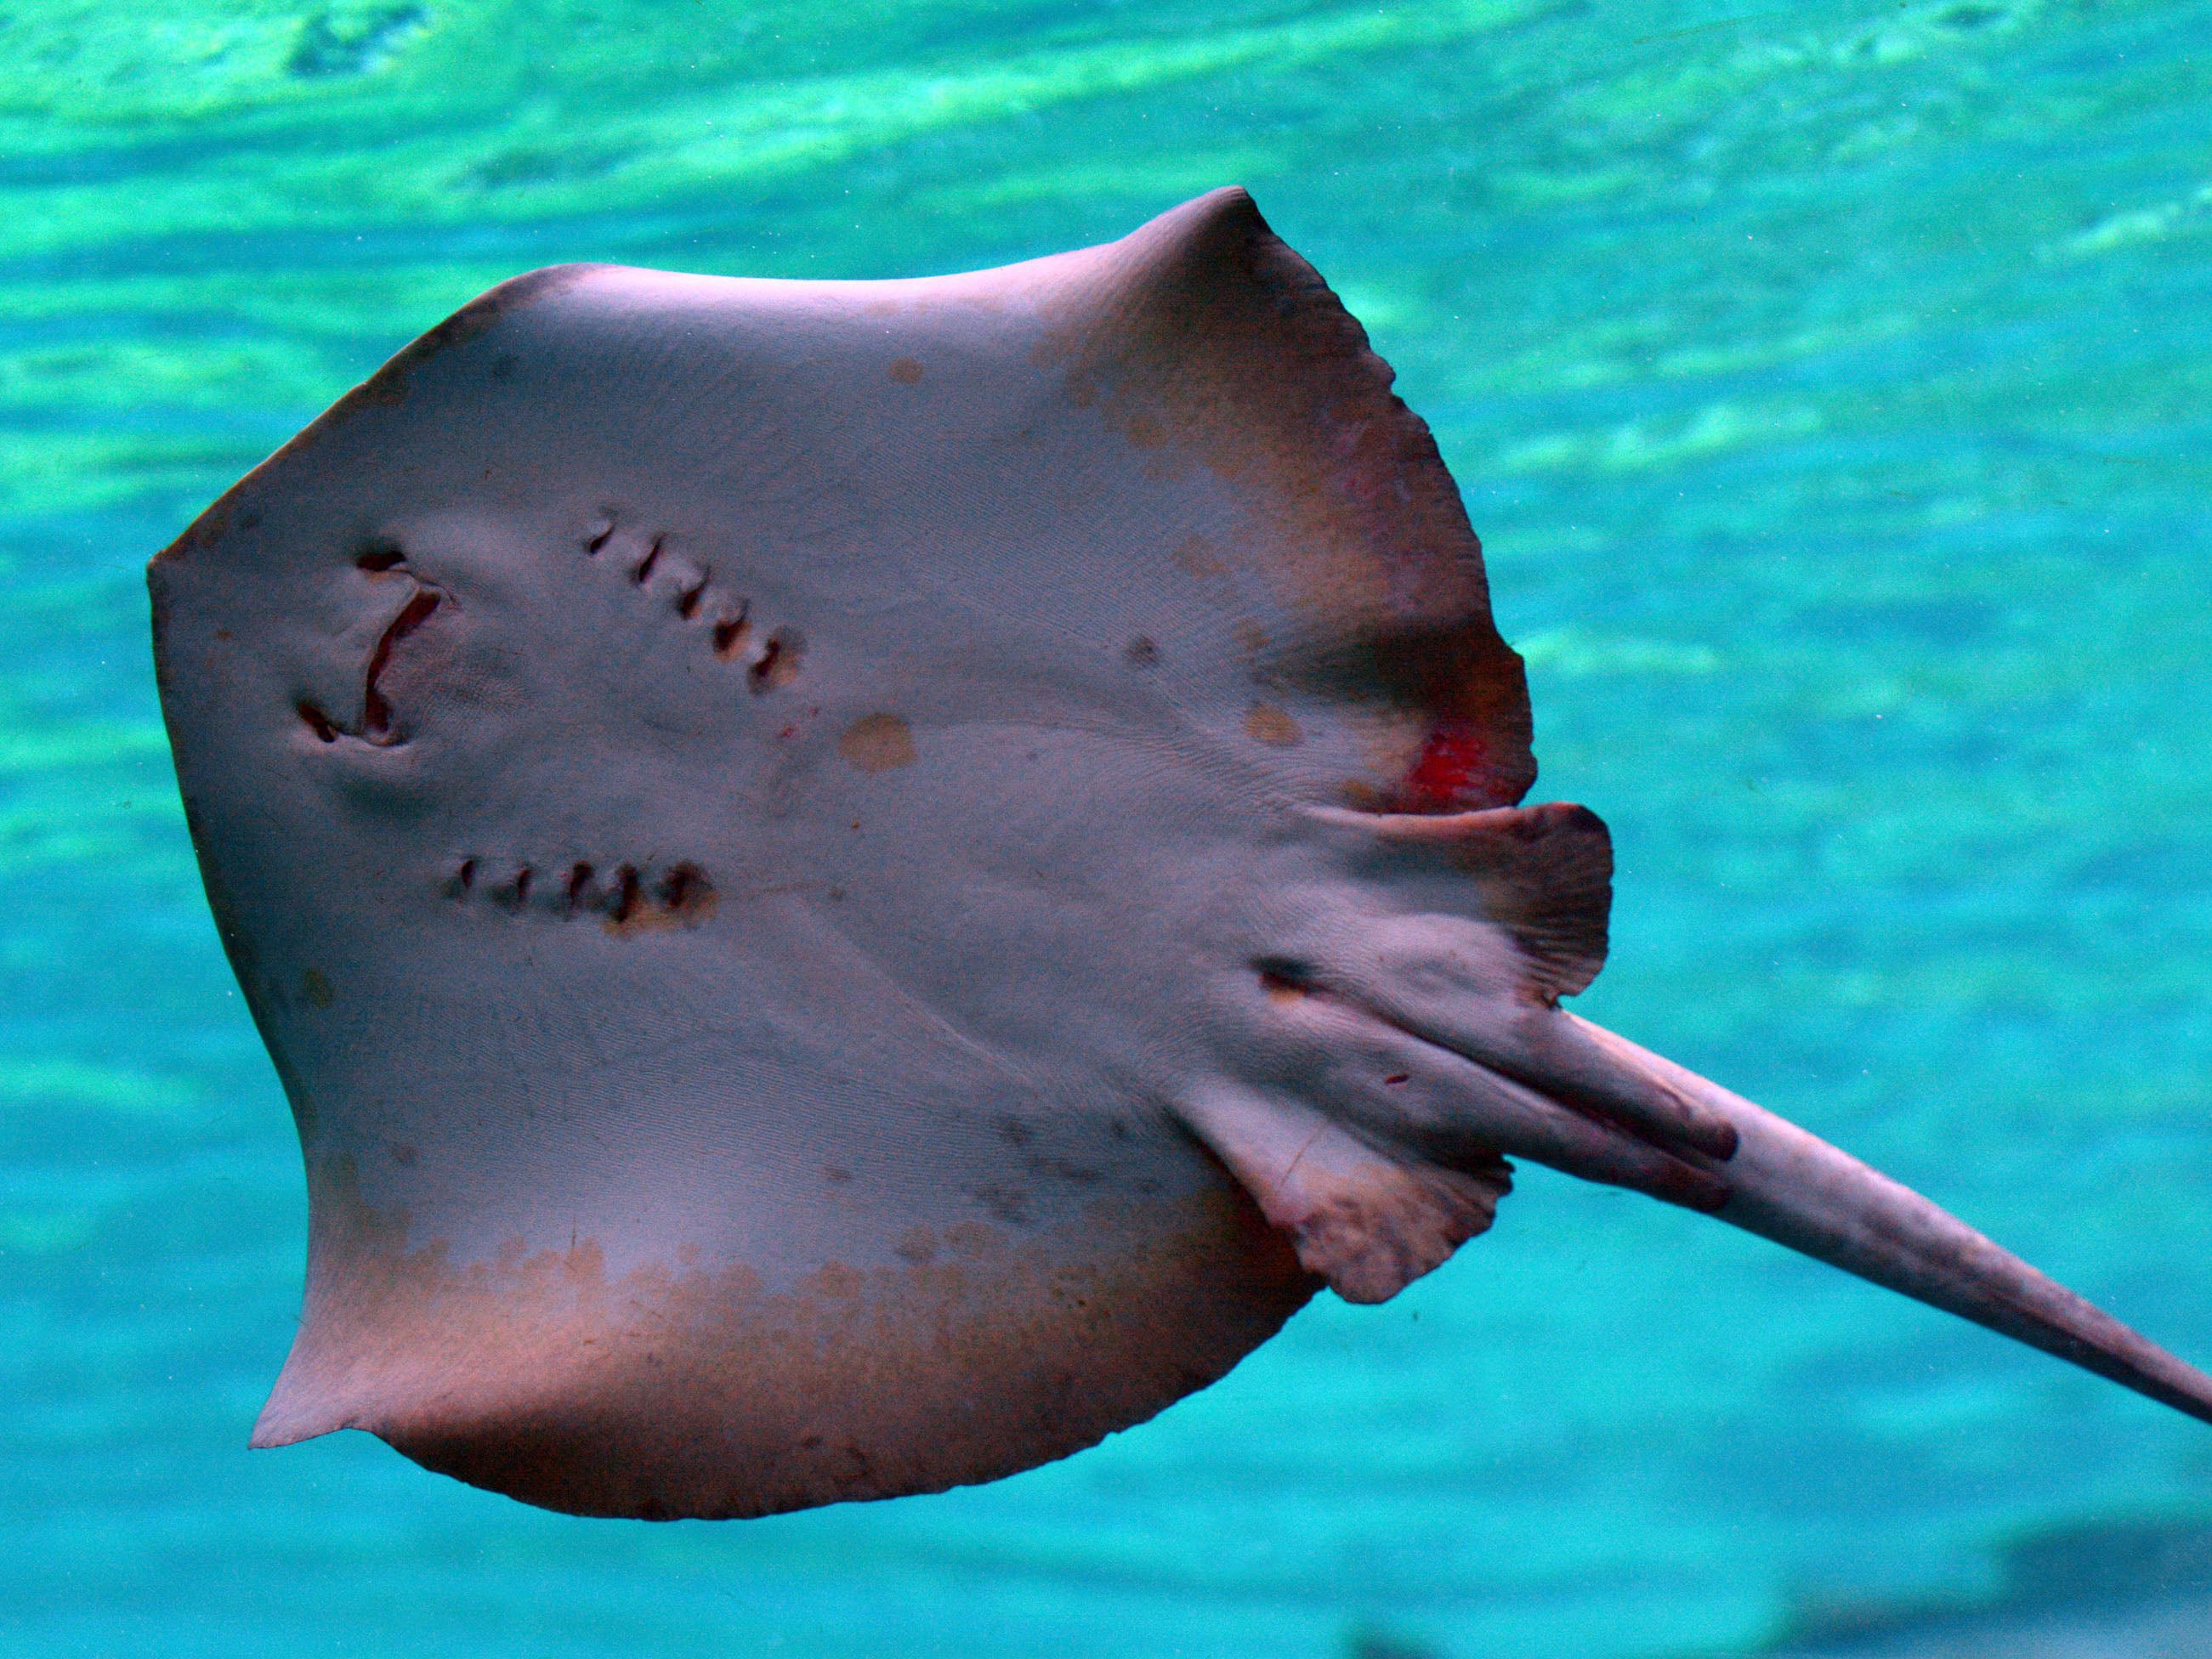 54 rays died at the Chicago zoo after a tank malfunction